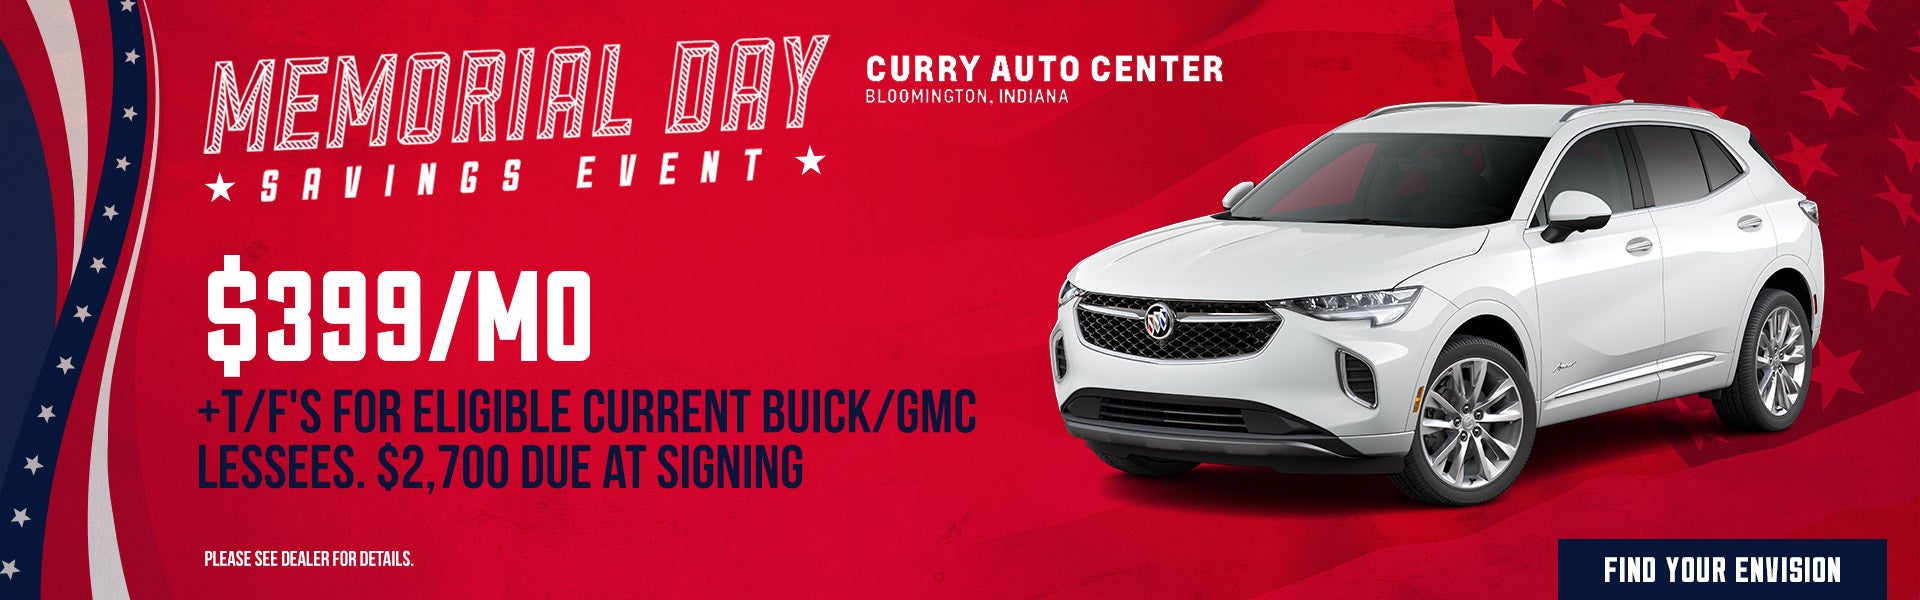 New Envision | Curry Auto Center | Bloomington, IN